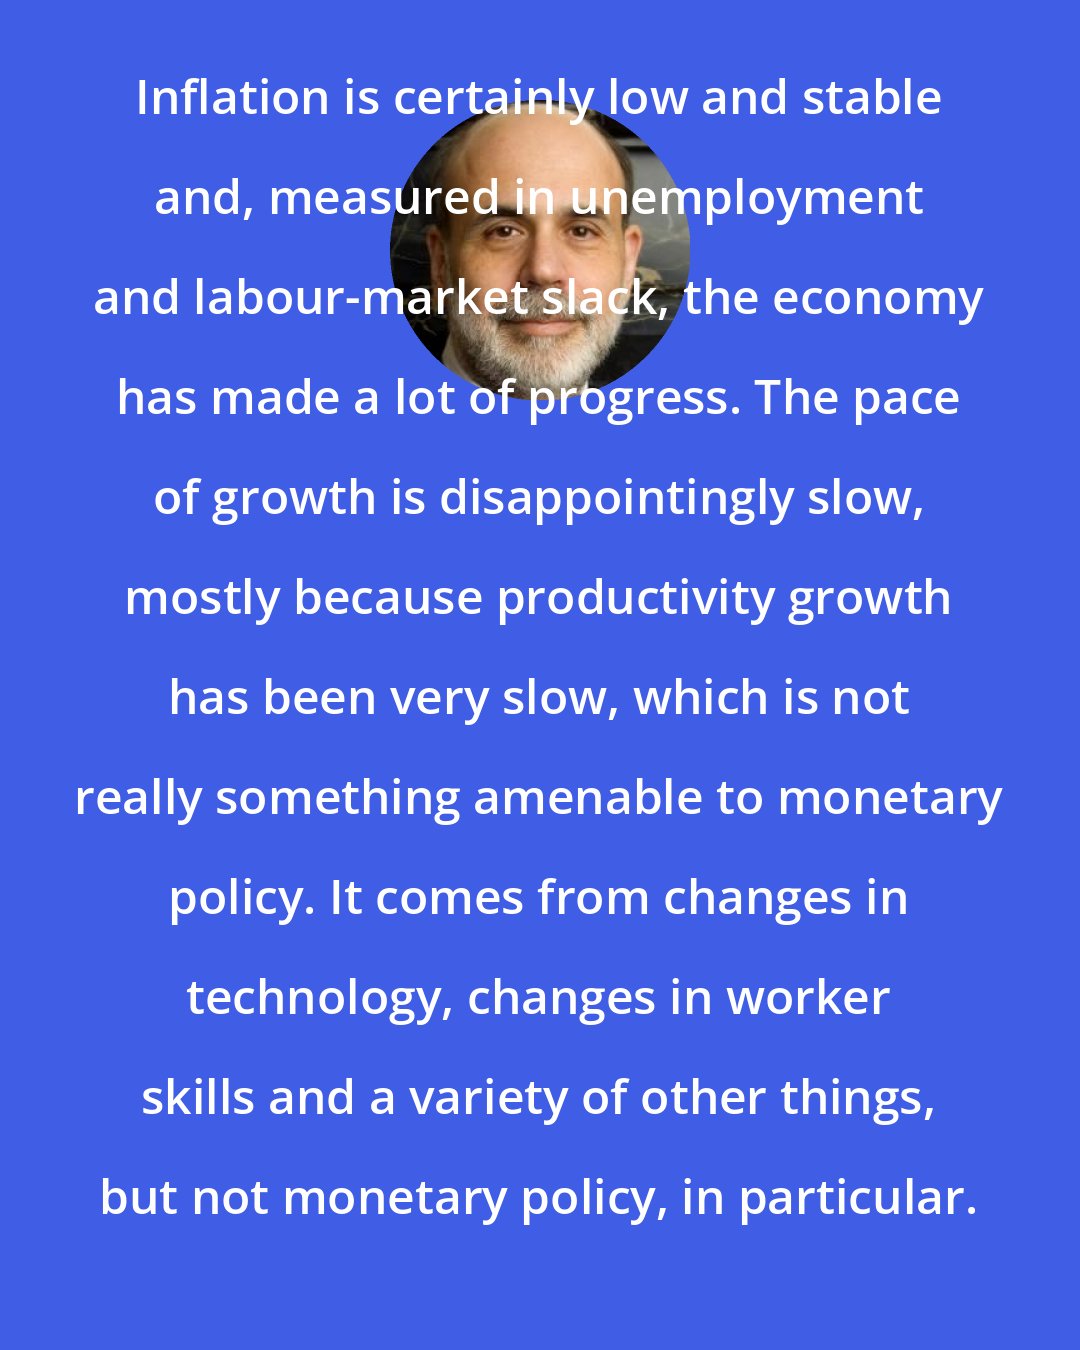 Ben Bernanke: Inflation is certainly low and stable and, measured in unemployment and labour-market slack, the economy has made a lot of progress. The pace of growth is disappointingly slow, mostly because productivity growth has been very slow, which is not really something amenable to monetary policy. It comes from changes in technology, changes in worker skills and a variety of other things, but not monetary policy, in particular.